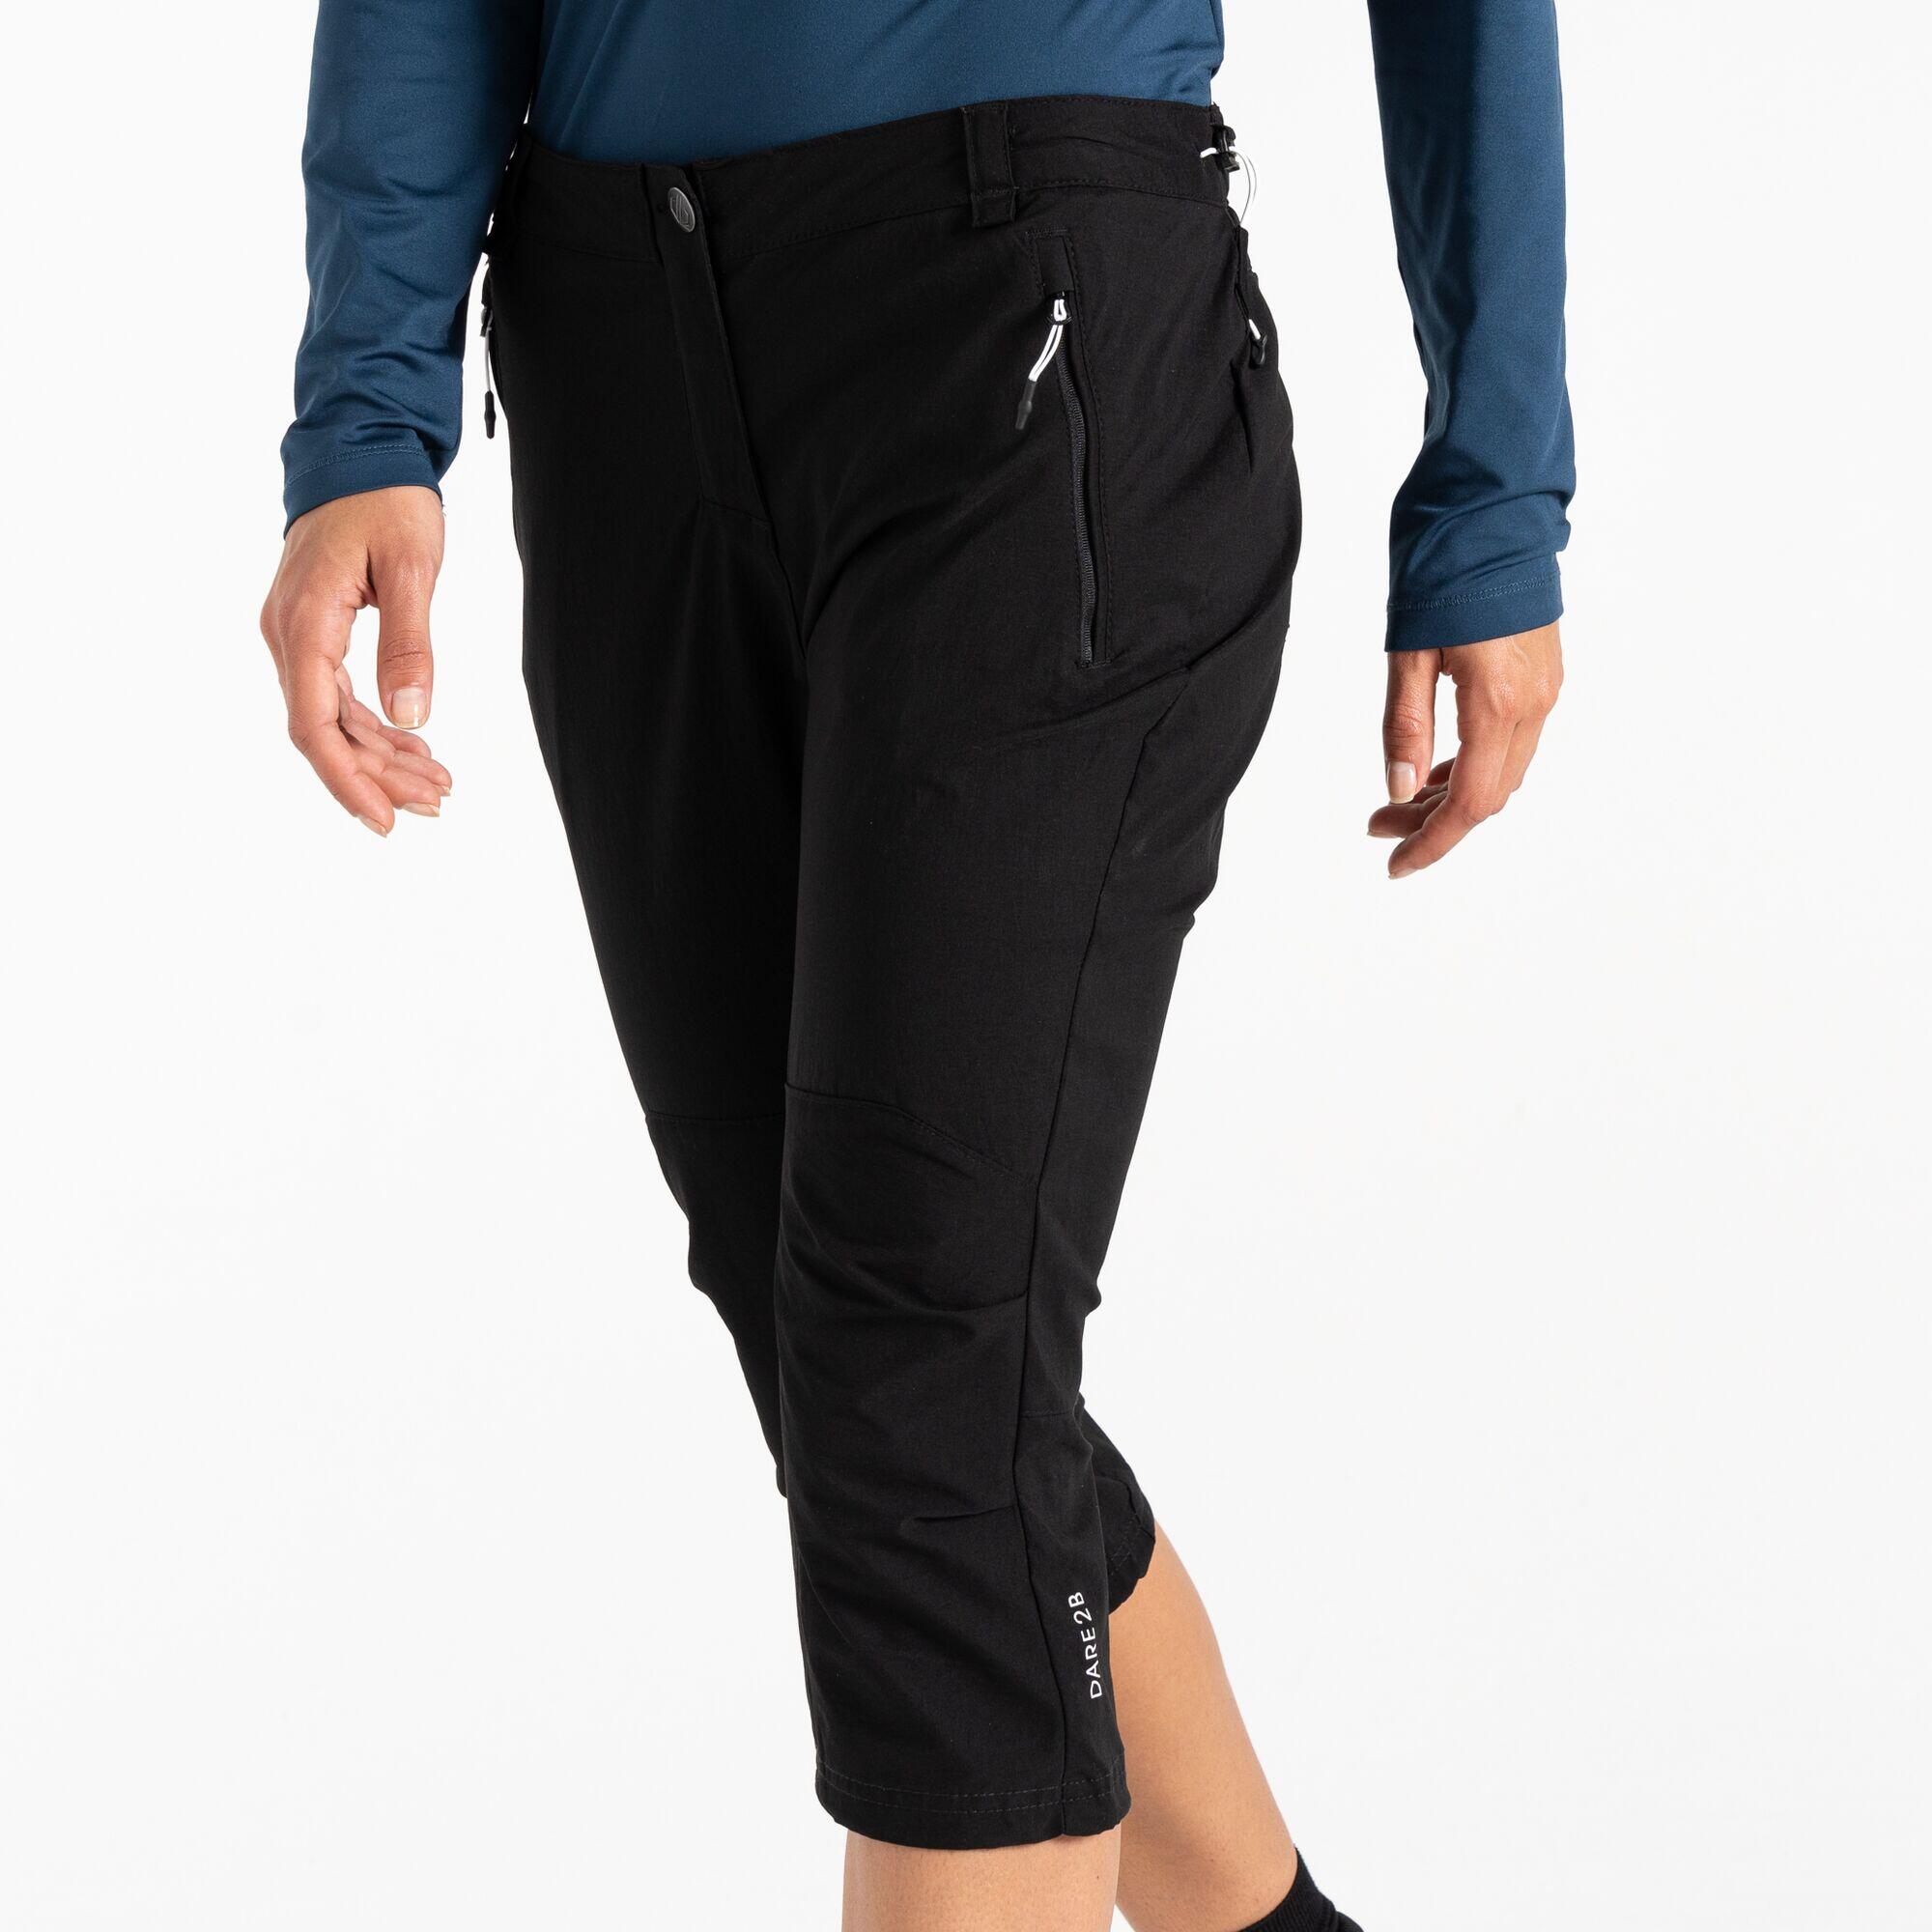 Buy Black Dare 2b x Next Tundral Salopette Ski Trousers from Next Luxembourg